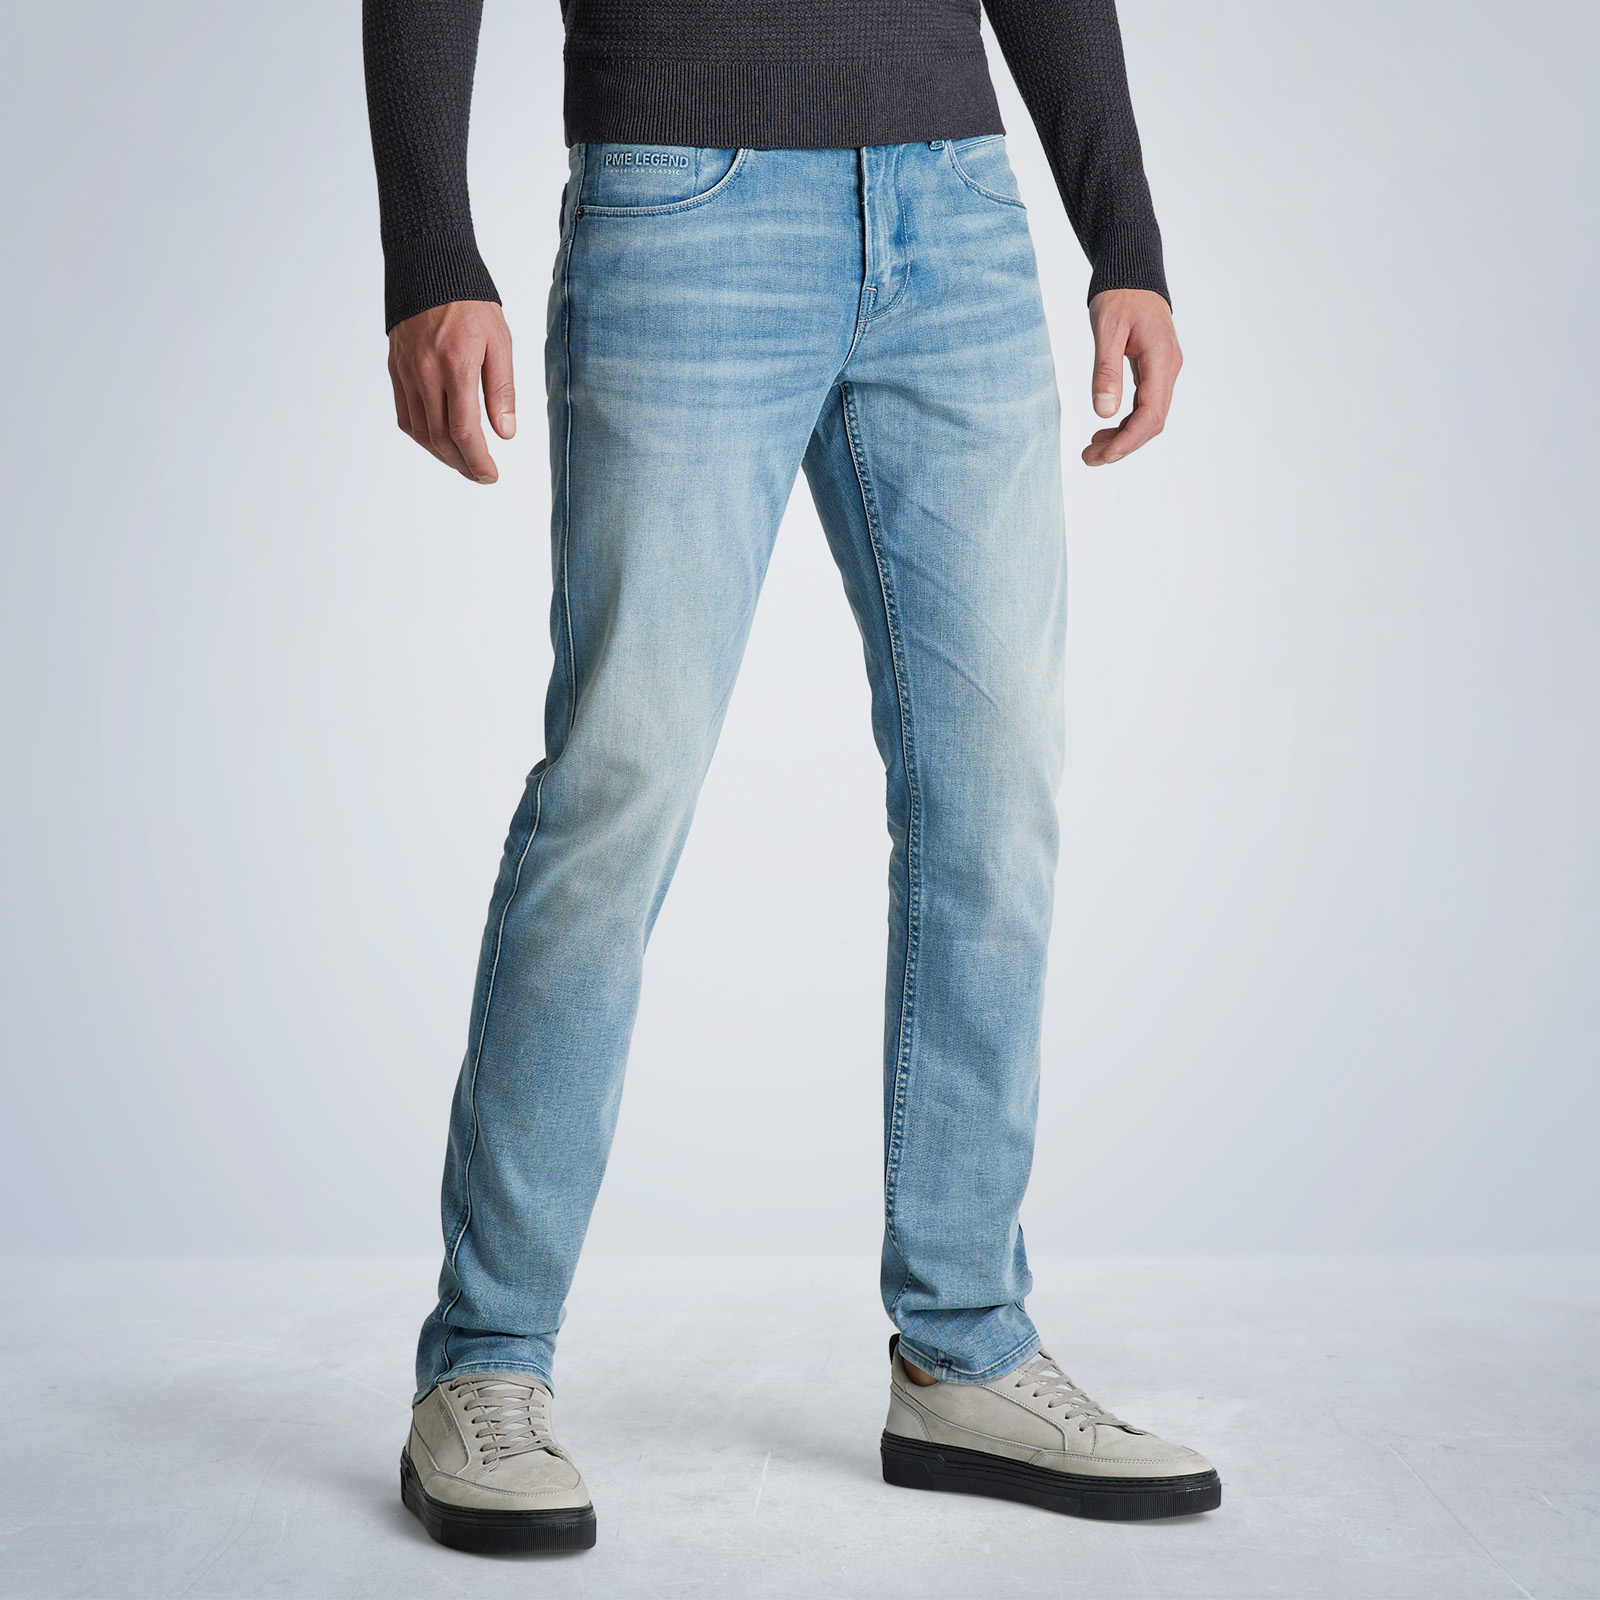 PME LEGEND jeans Free shipping PME Nightflight | | Legend and returns